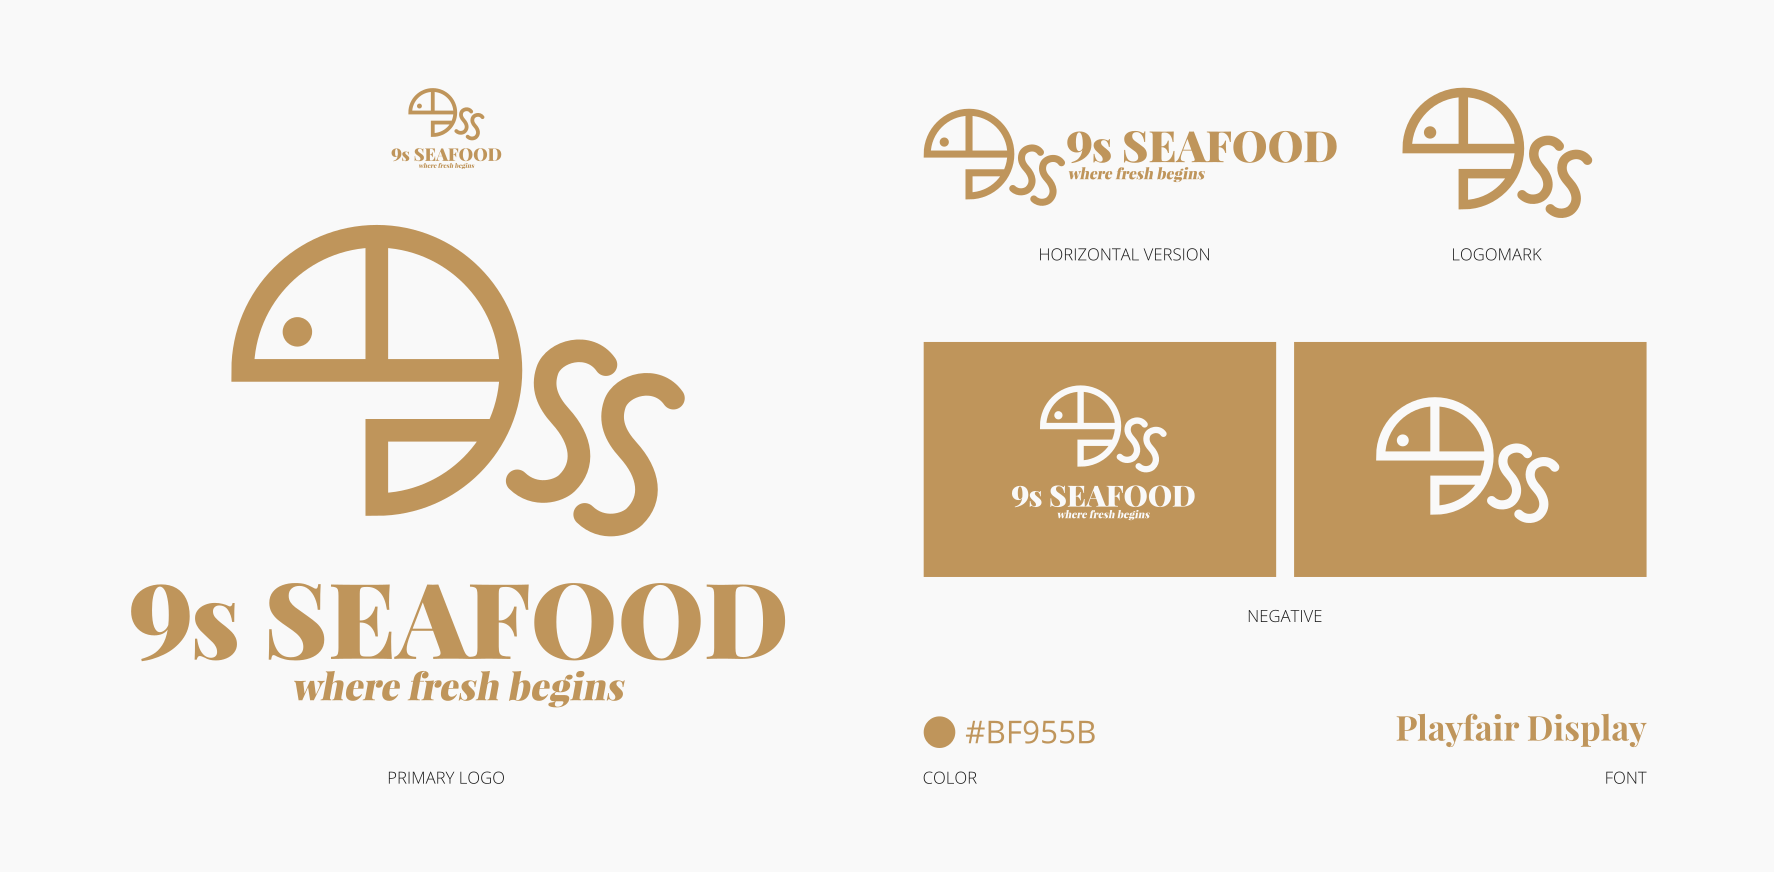 The logo redesign for 9s Seafood